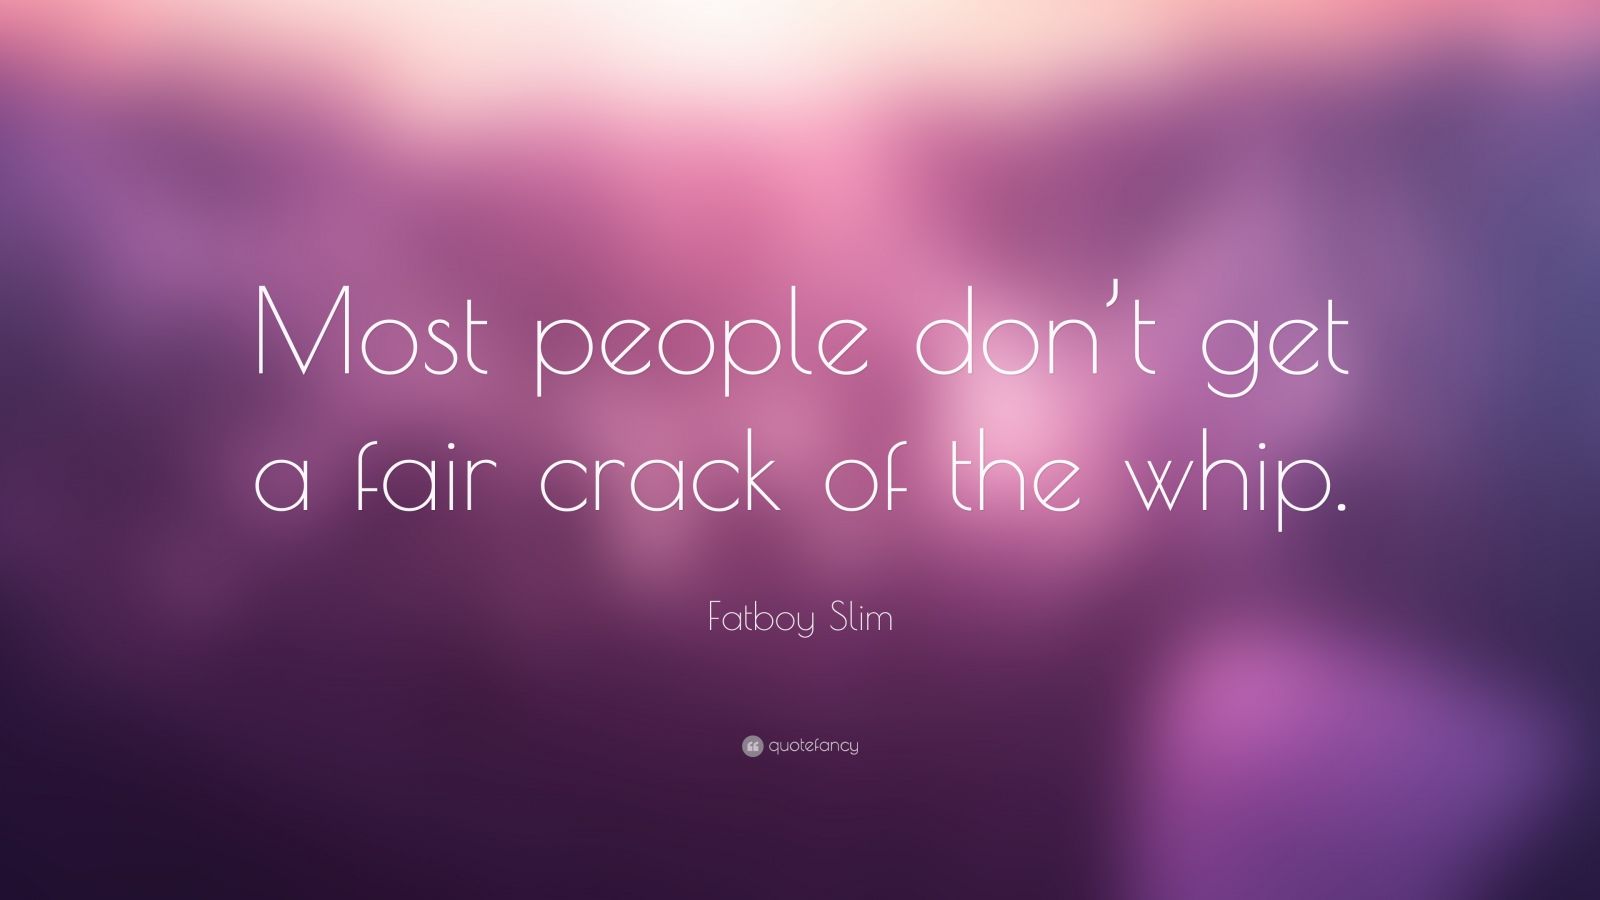 Fatboy Slim Quote: “Most people don’t get a fair crack of the whip.” (7